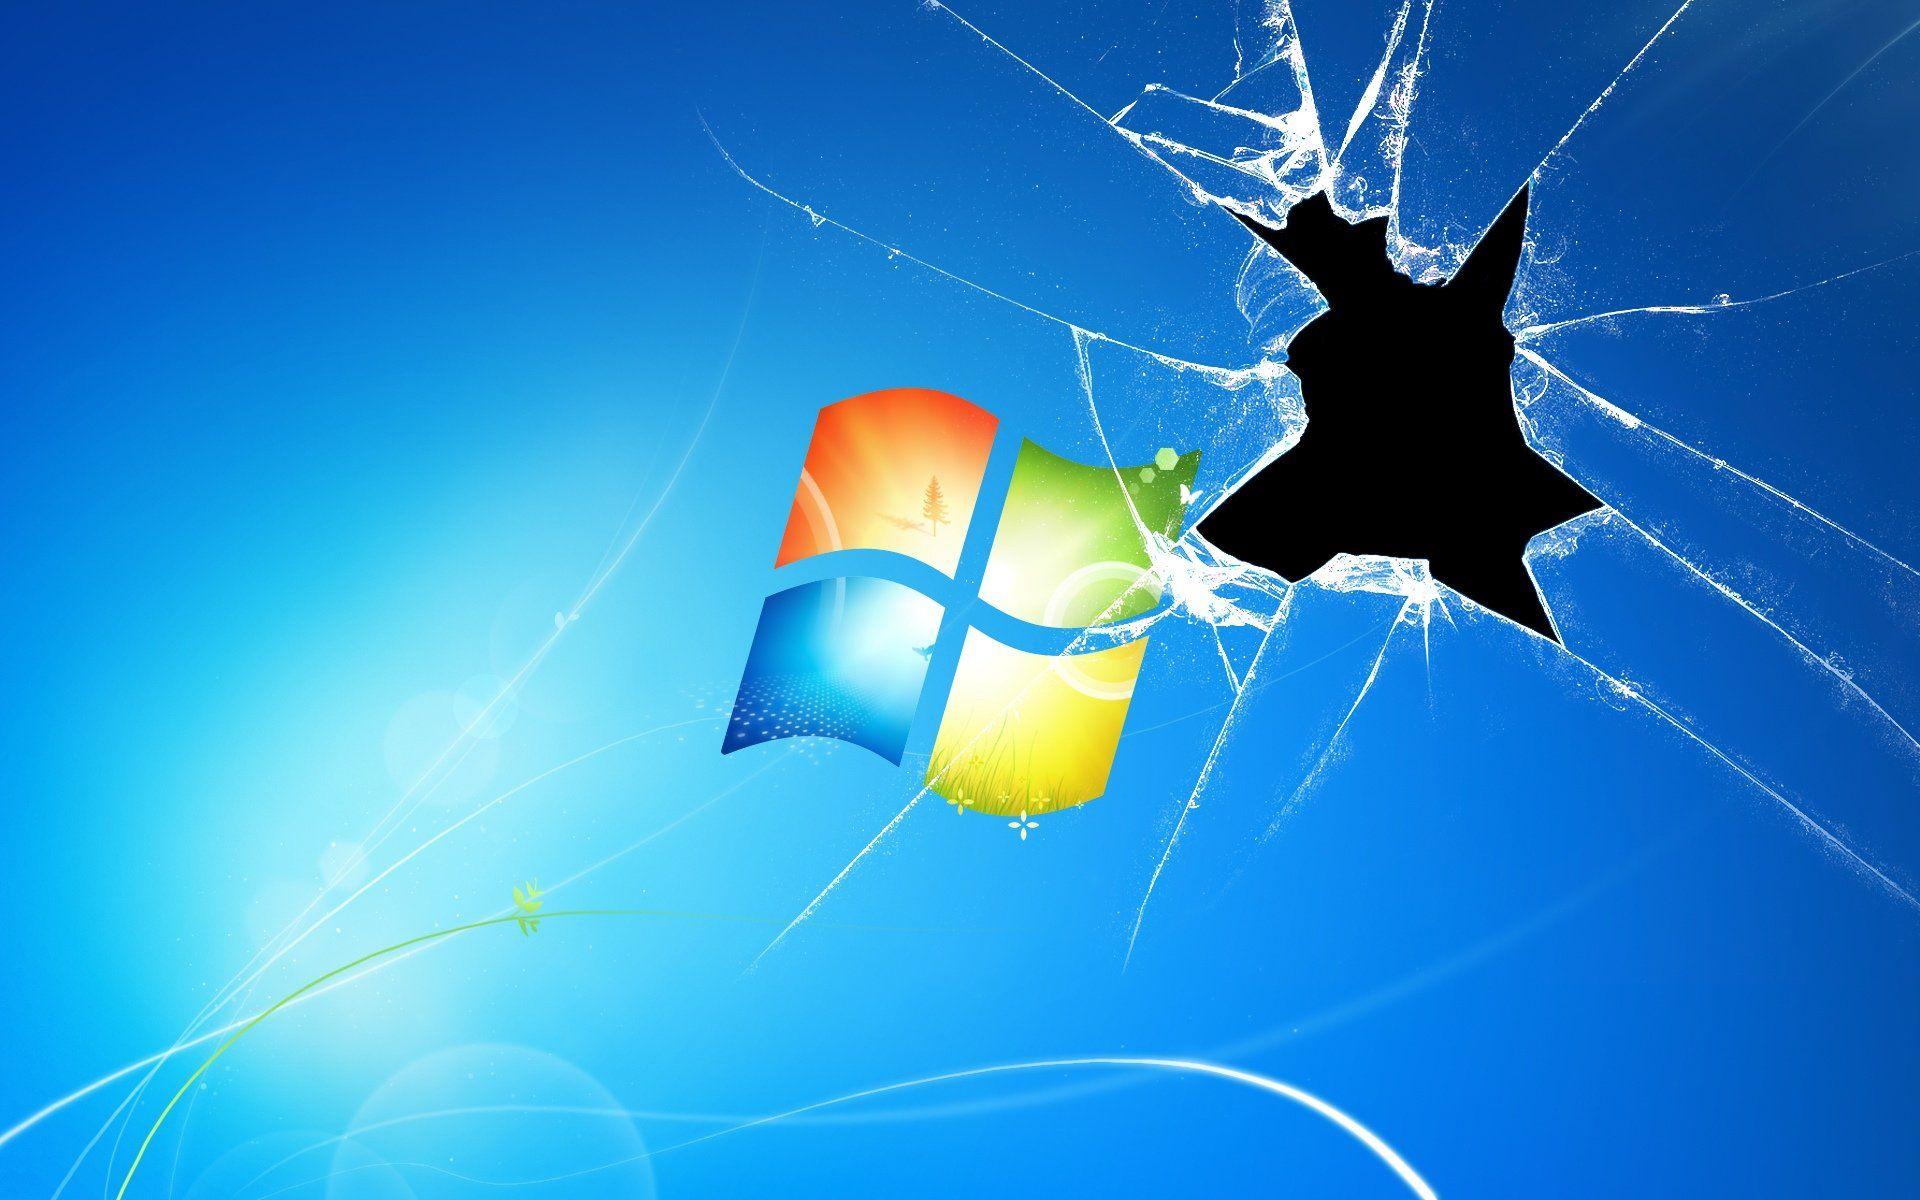 Awesome Themes Wallpaper For Windows 7 75 On Free Windows Wallpaper With Themes Wallpaper For Windows